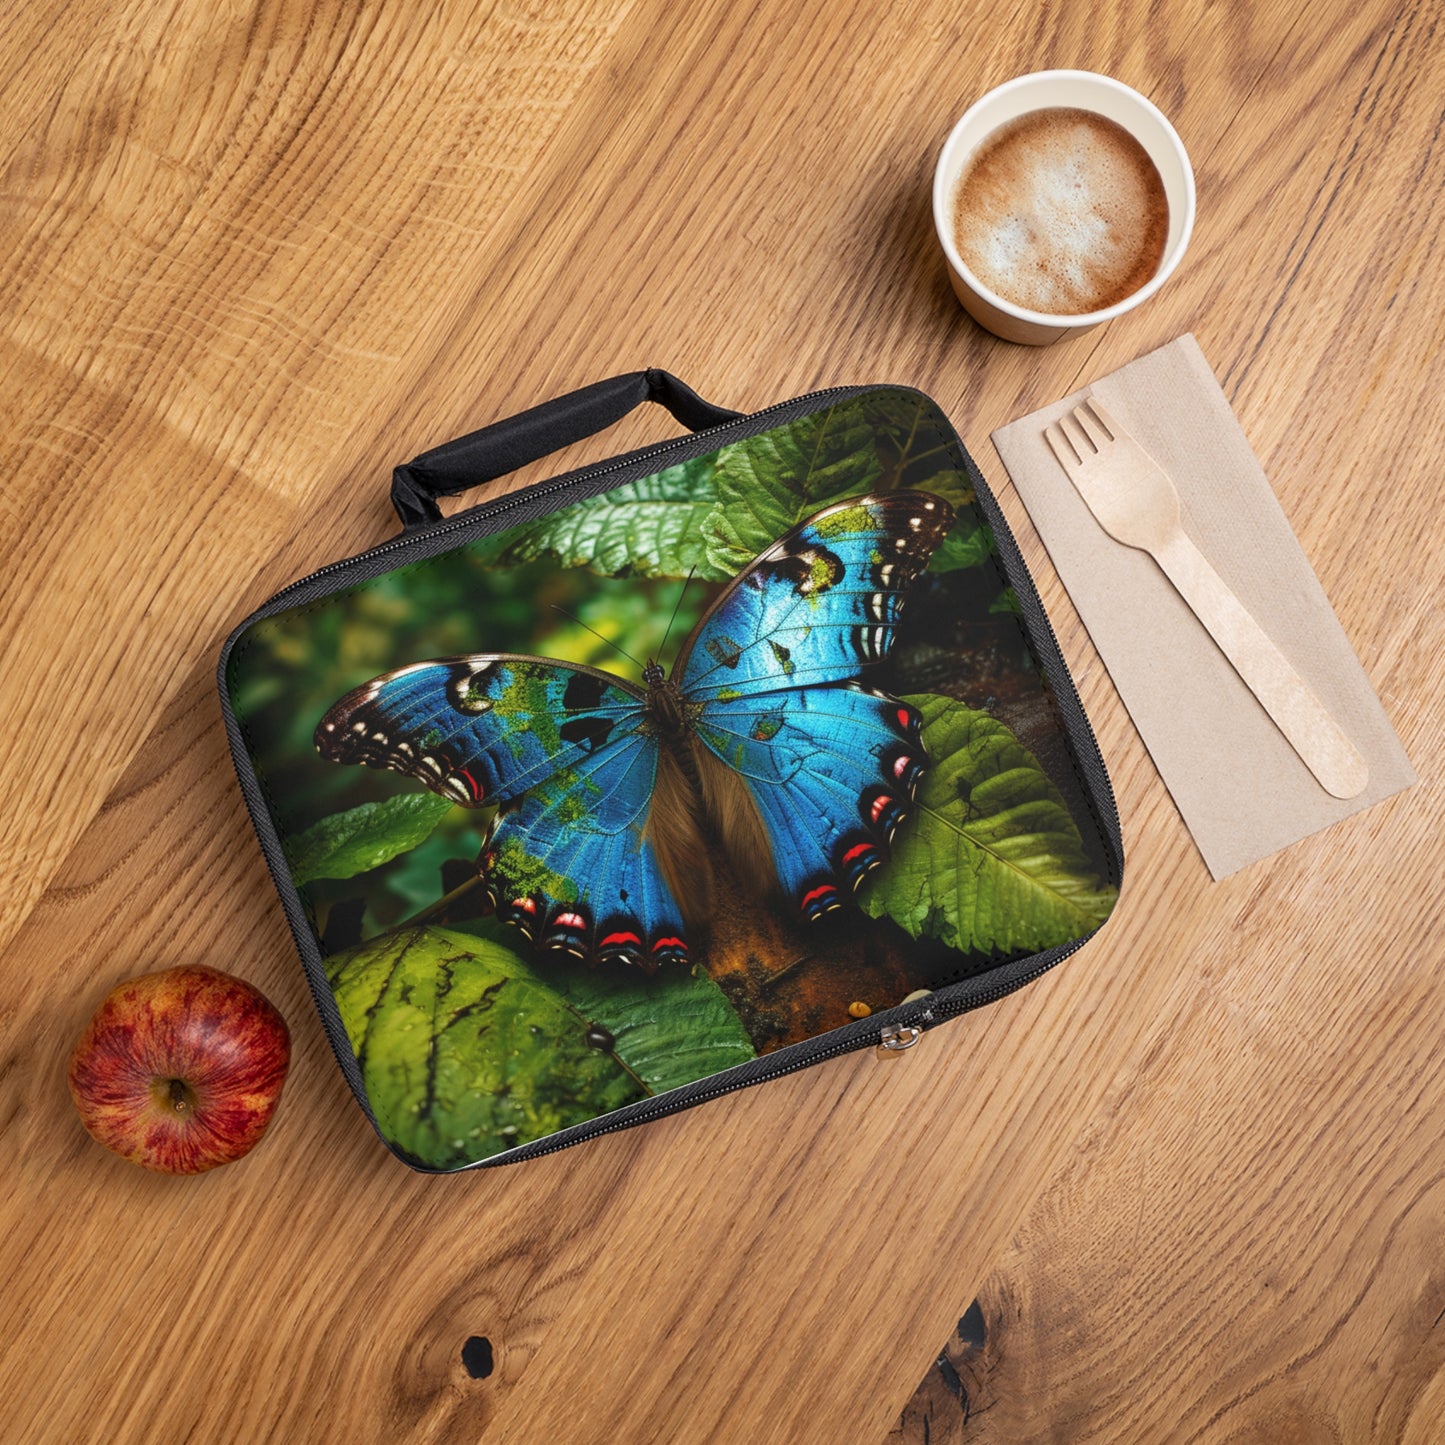 Lunch Bag Jungle Butterfly 2